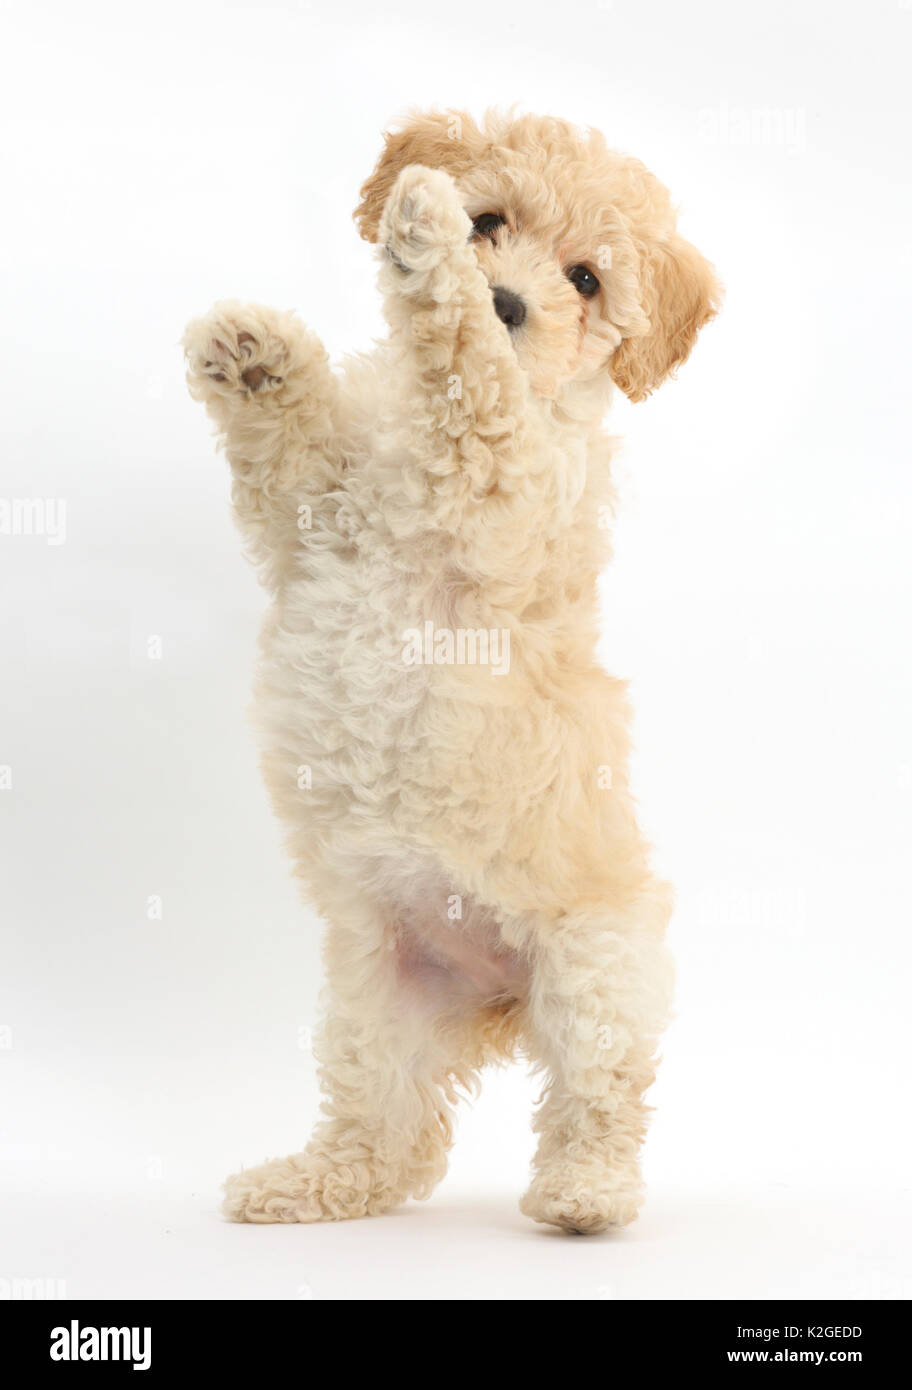 Poochon puppy, Bichon Frise cross Poodle, age 6 weeks standing on hind legs. Stock Photo